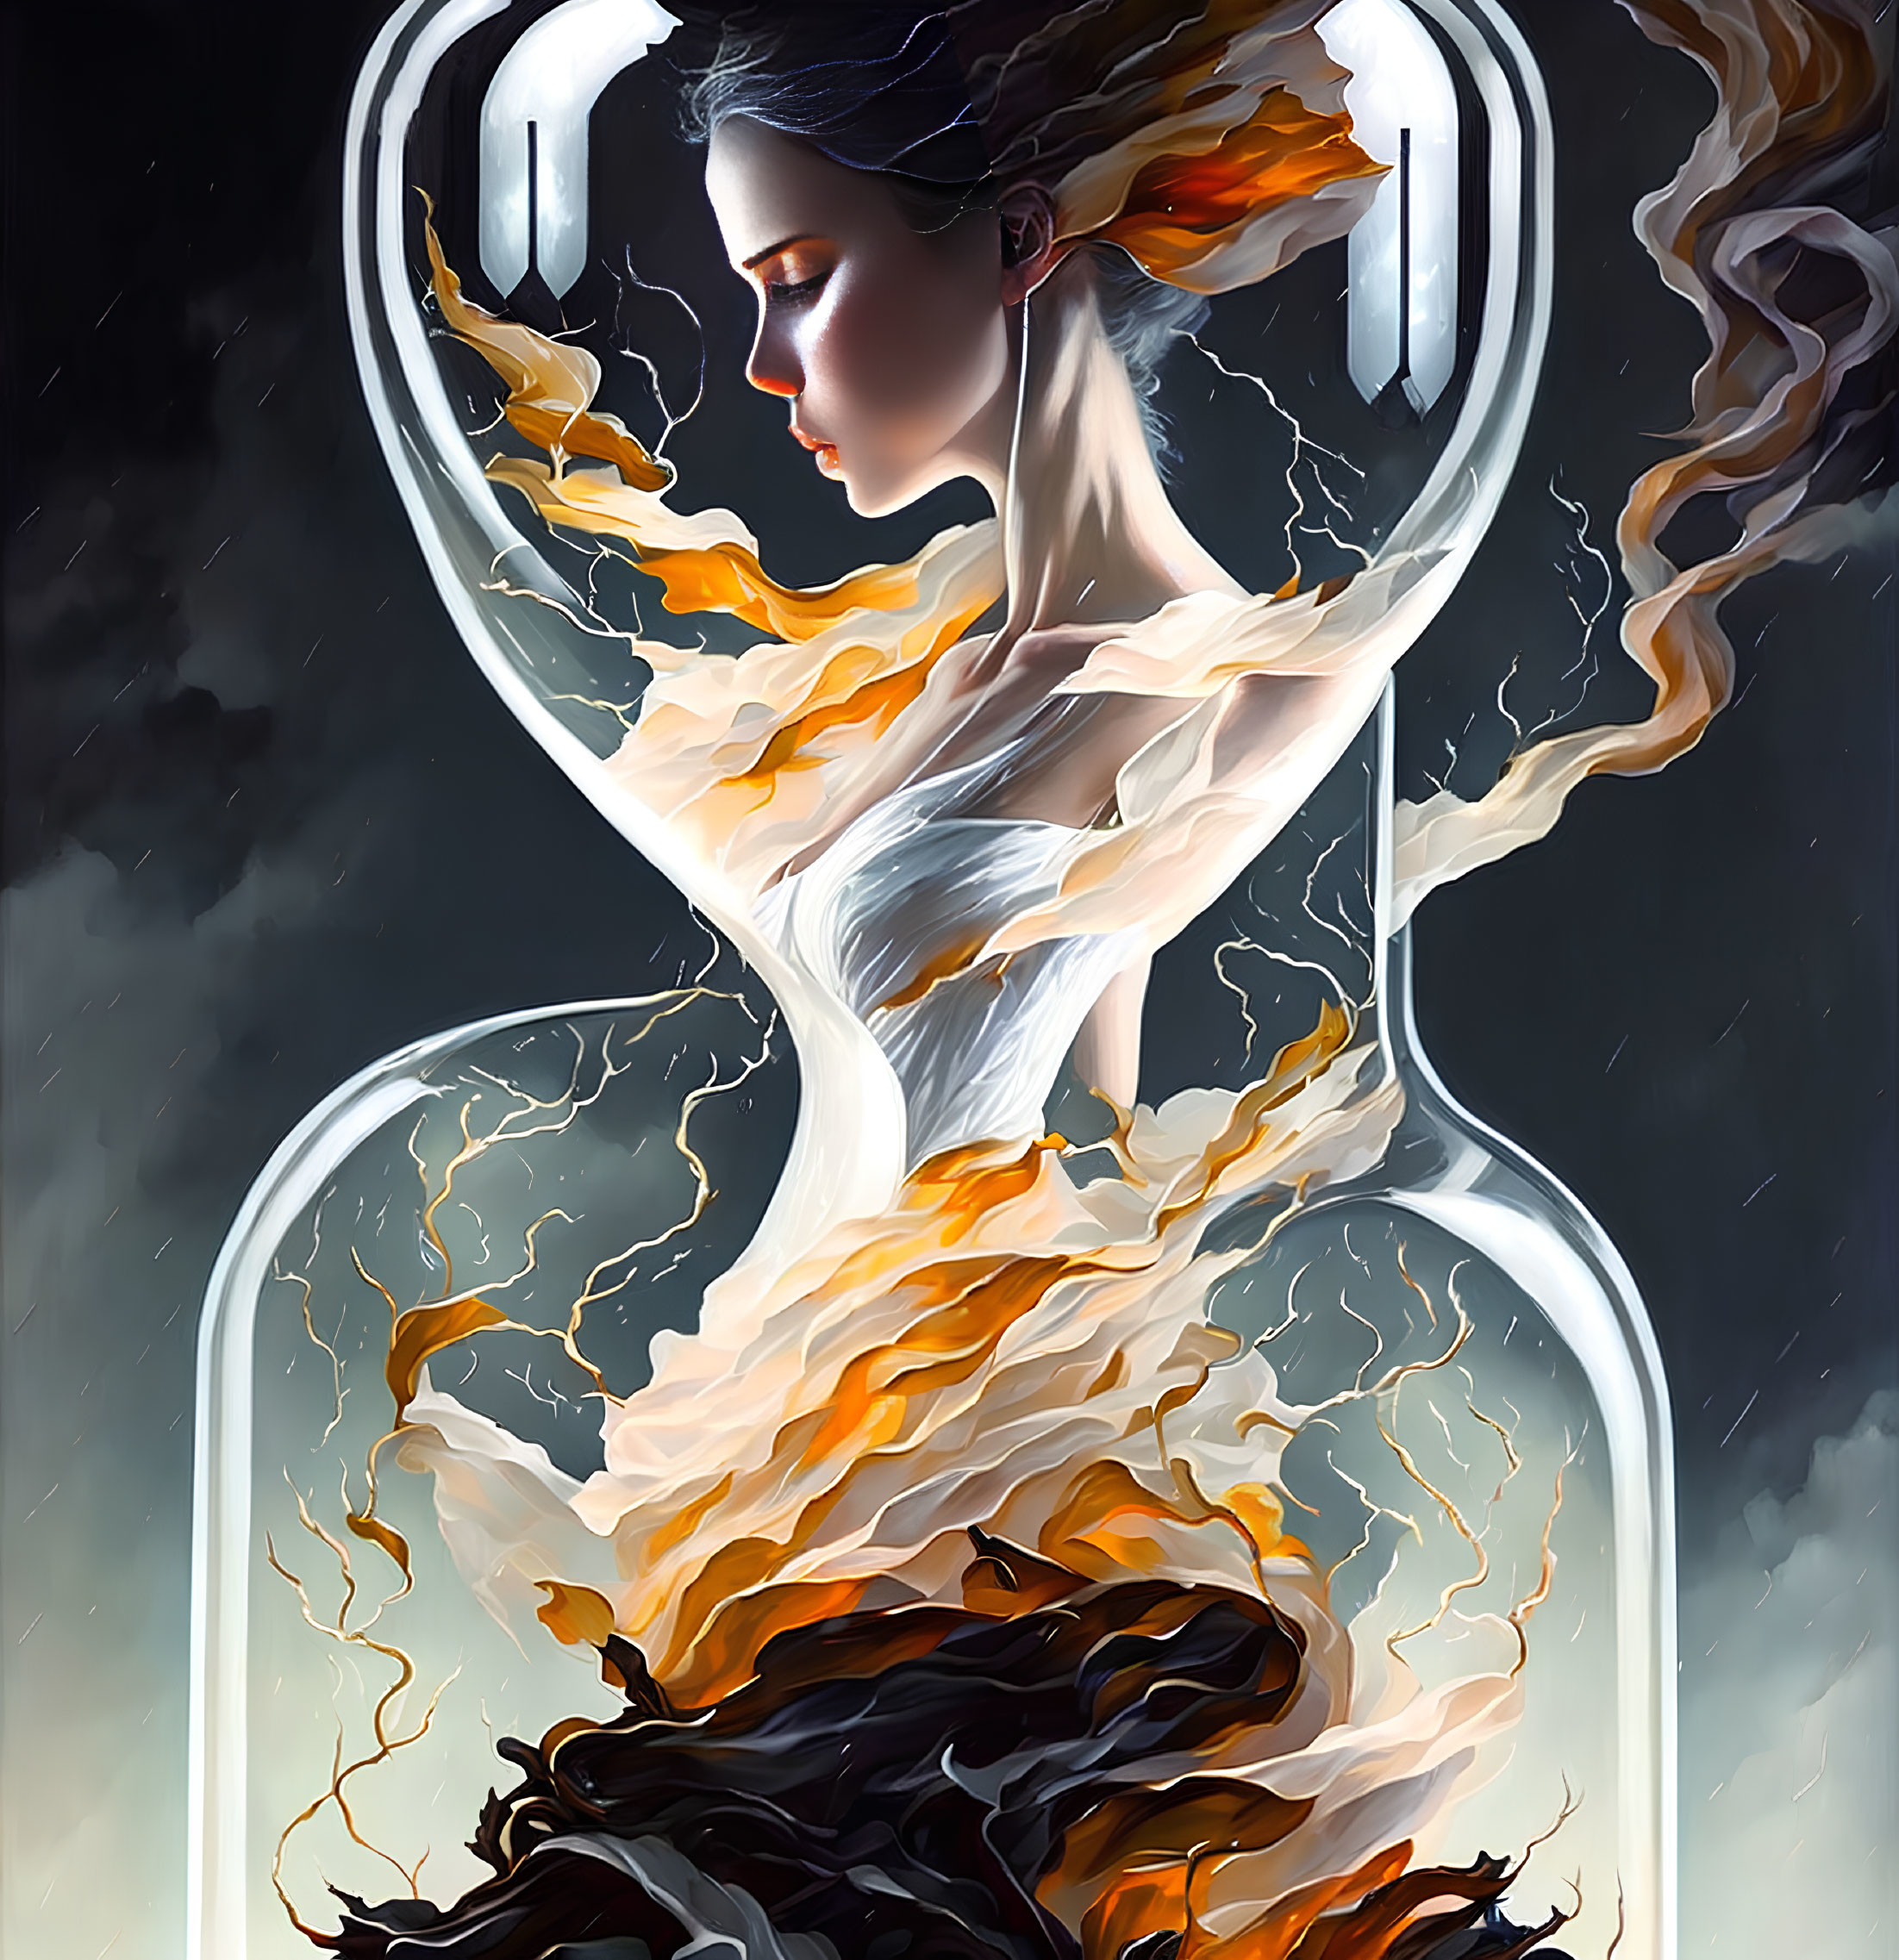 Stylized artwork woman with flowing hair and dress blending with hourglass symbolizing time and change